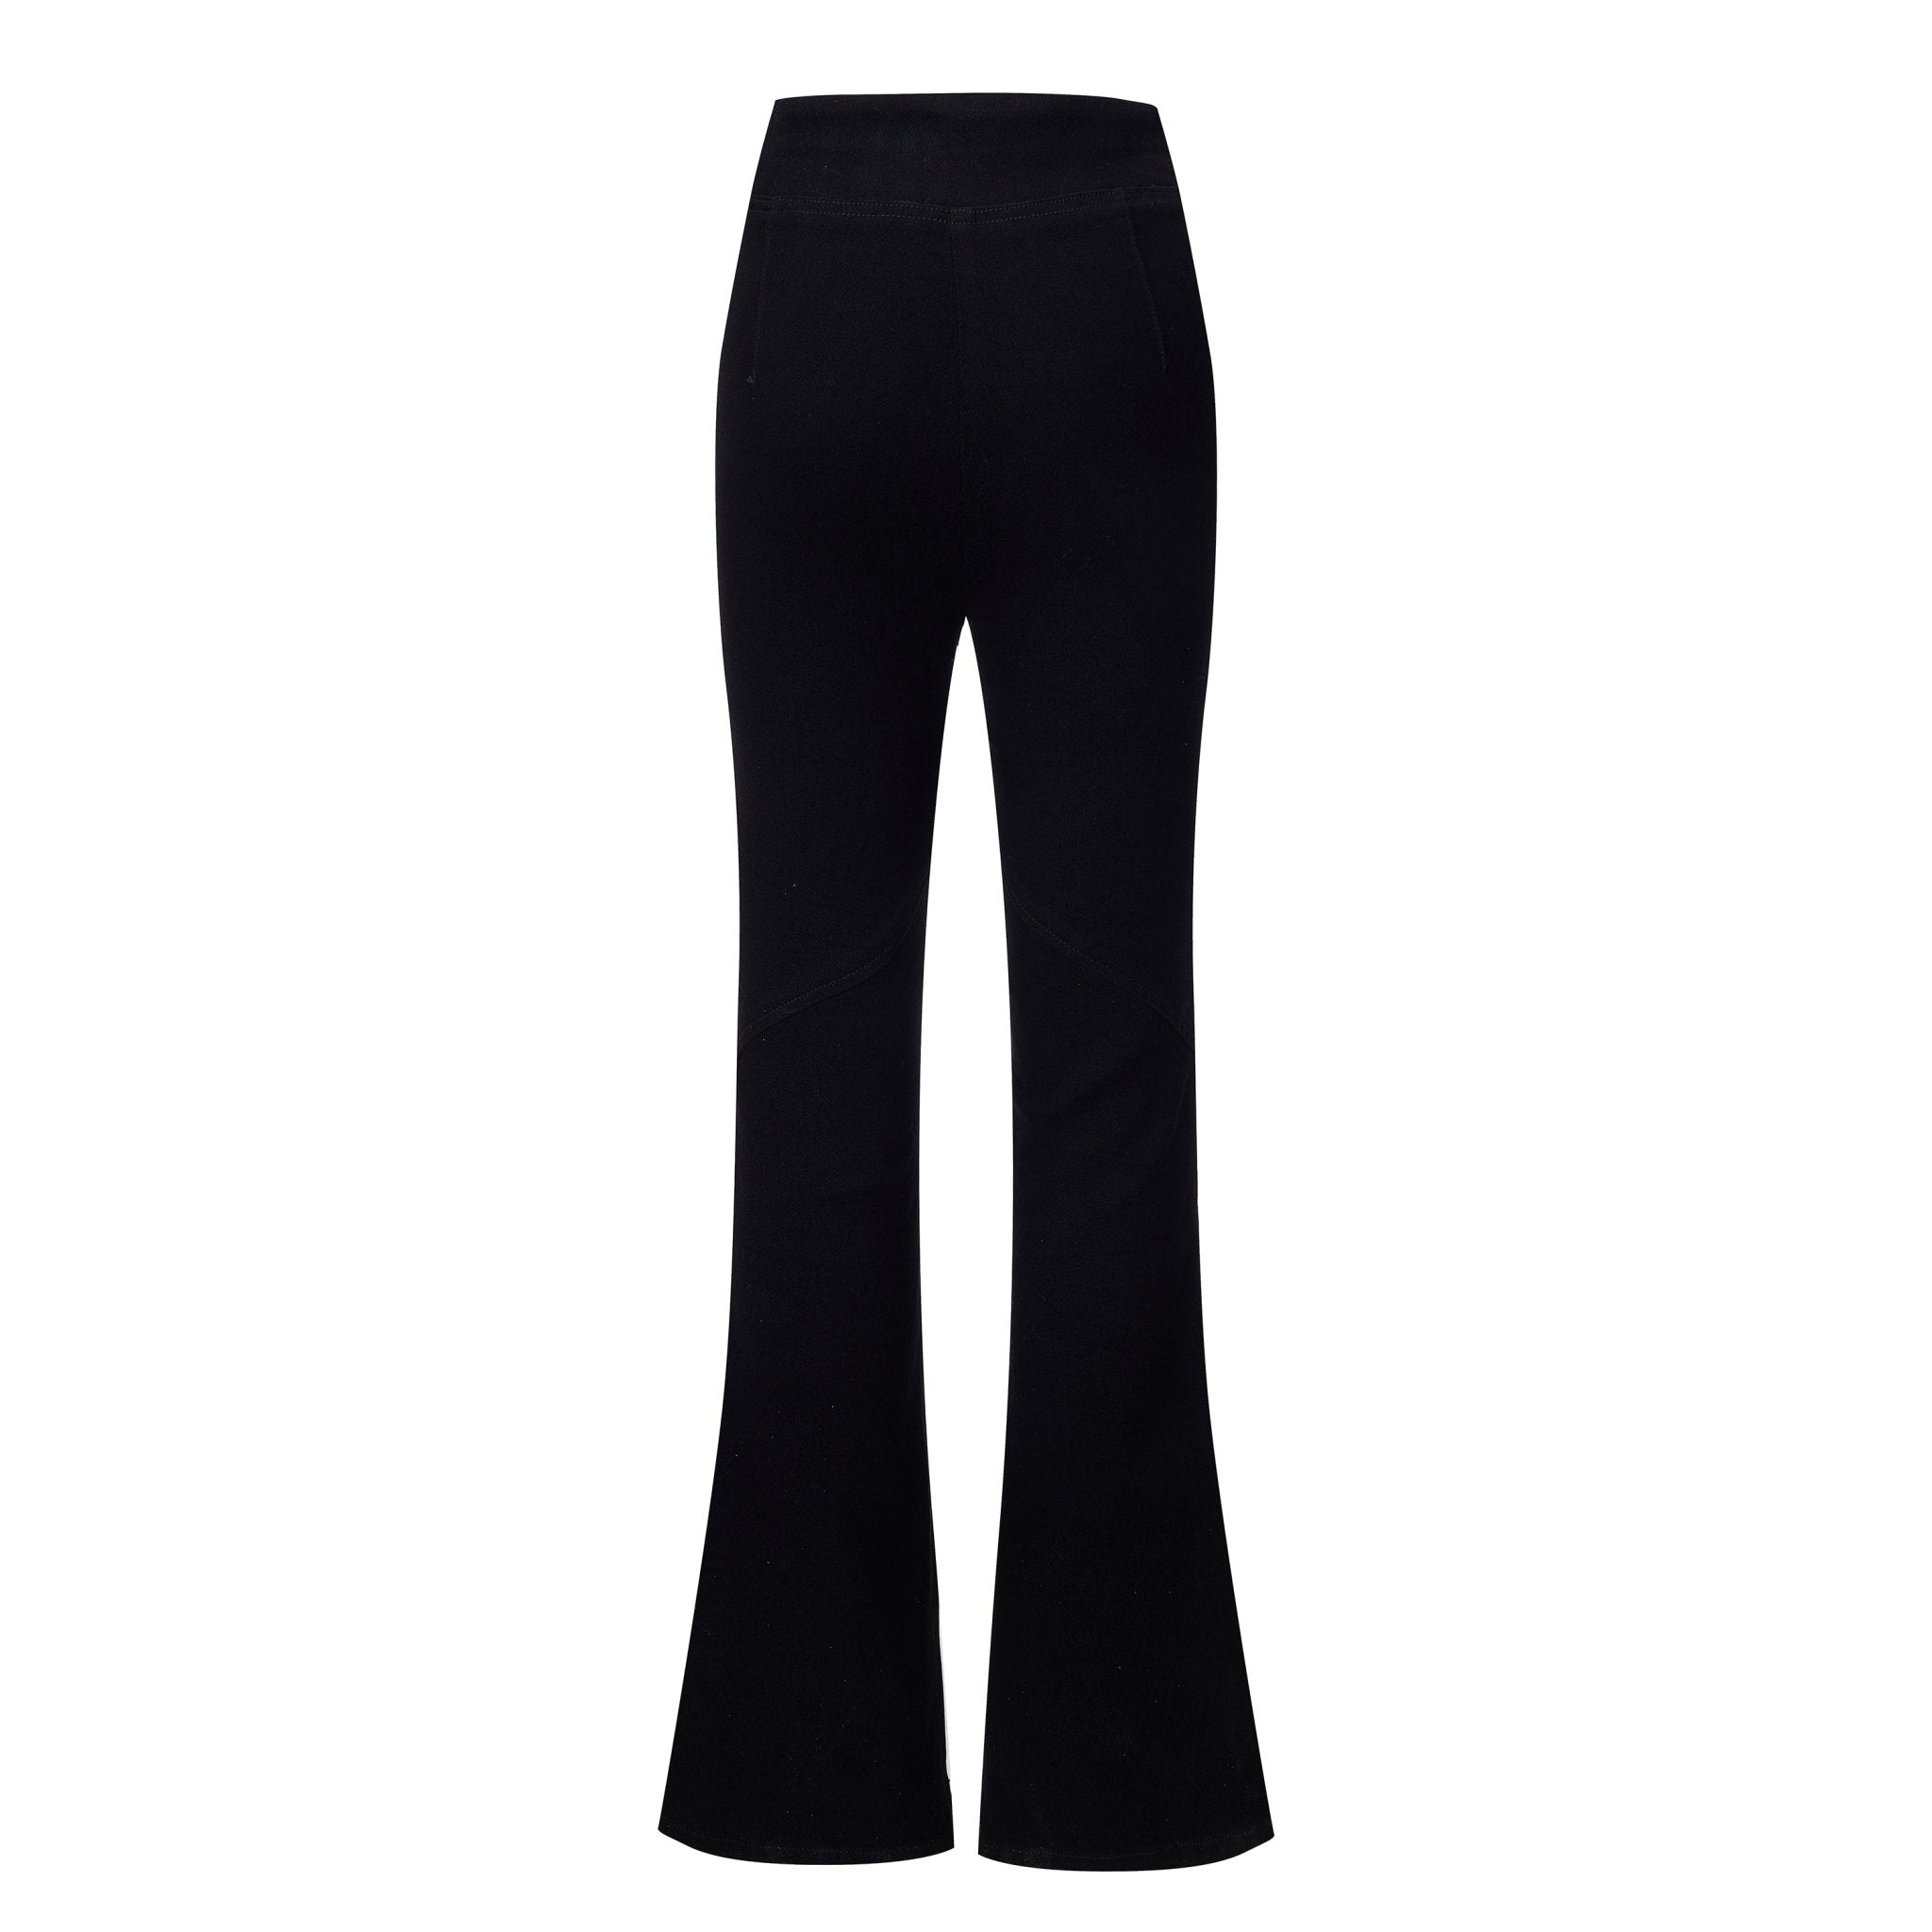 CPLUS SERIES Stretchy Fitted Jeans | MADA IN CHINA